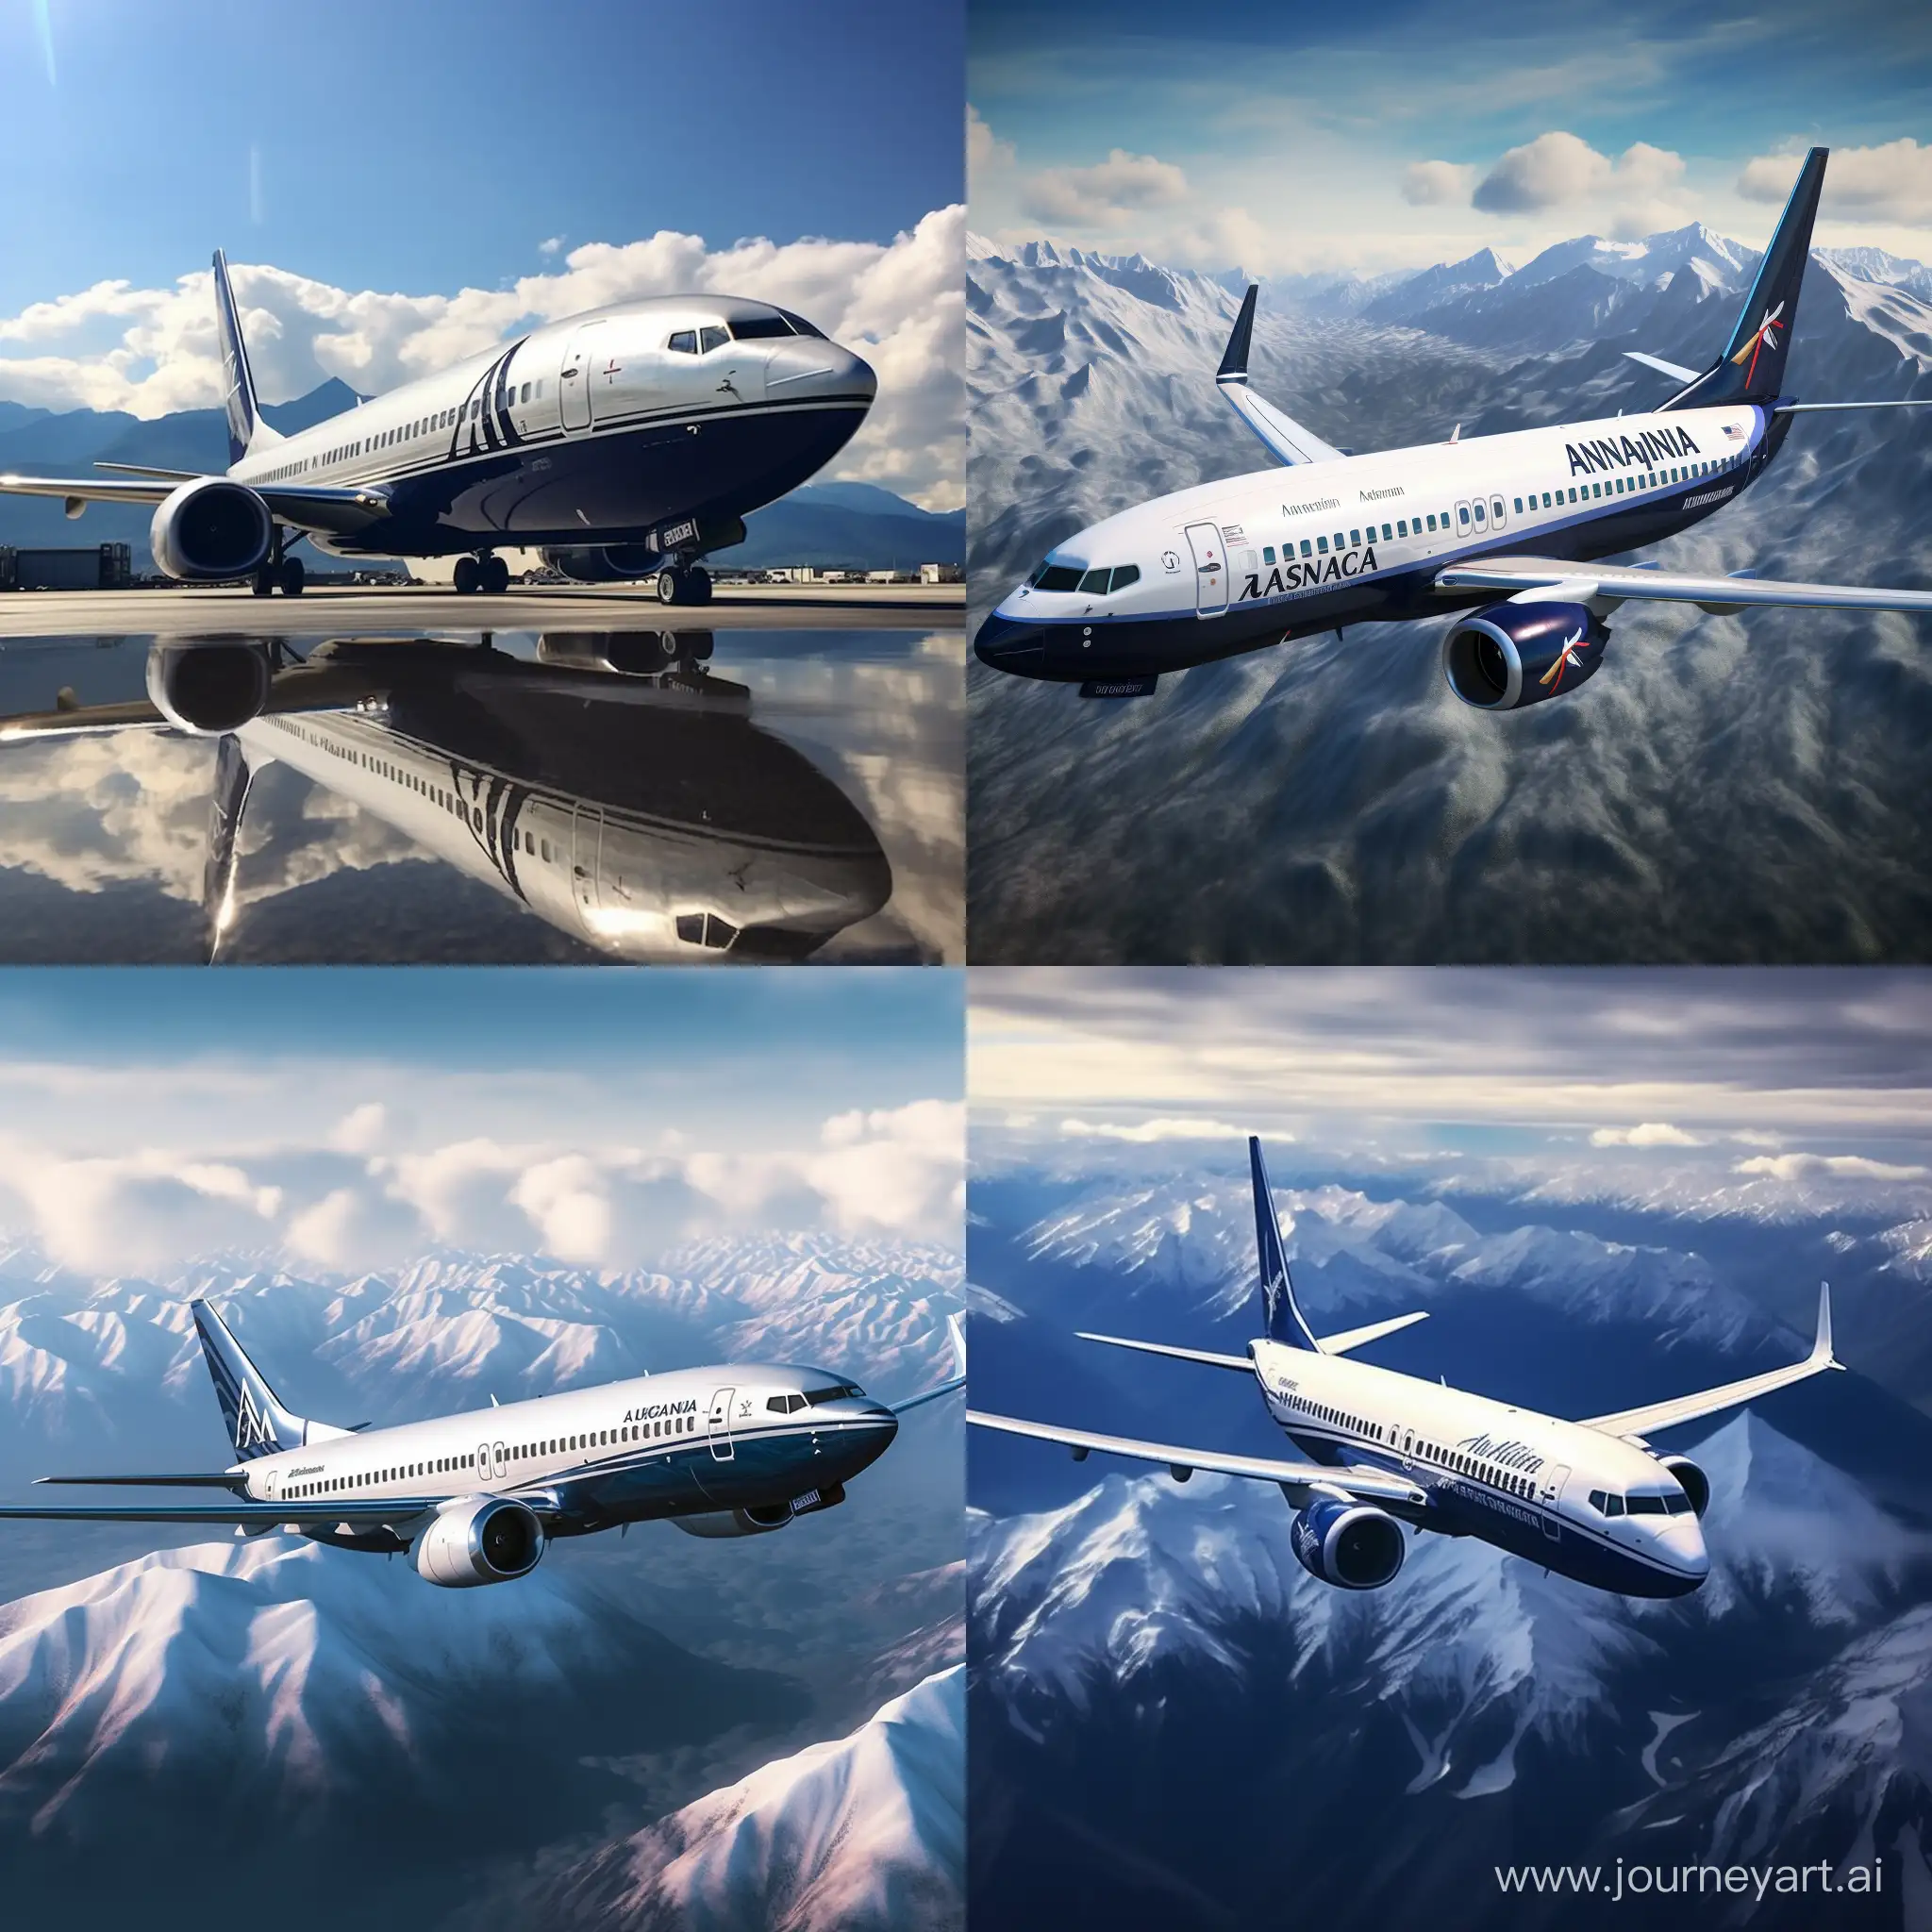 Photorealistic Boeing 737 with an Alaskan livery held together with duct tape.